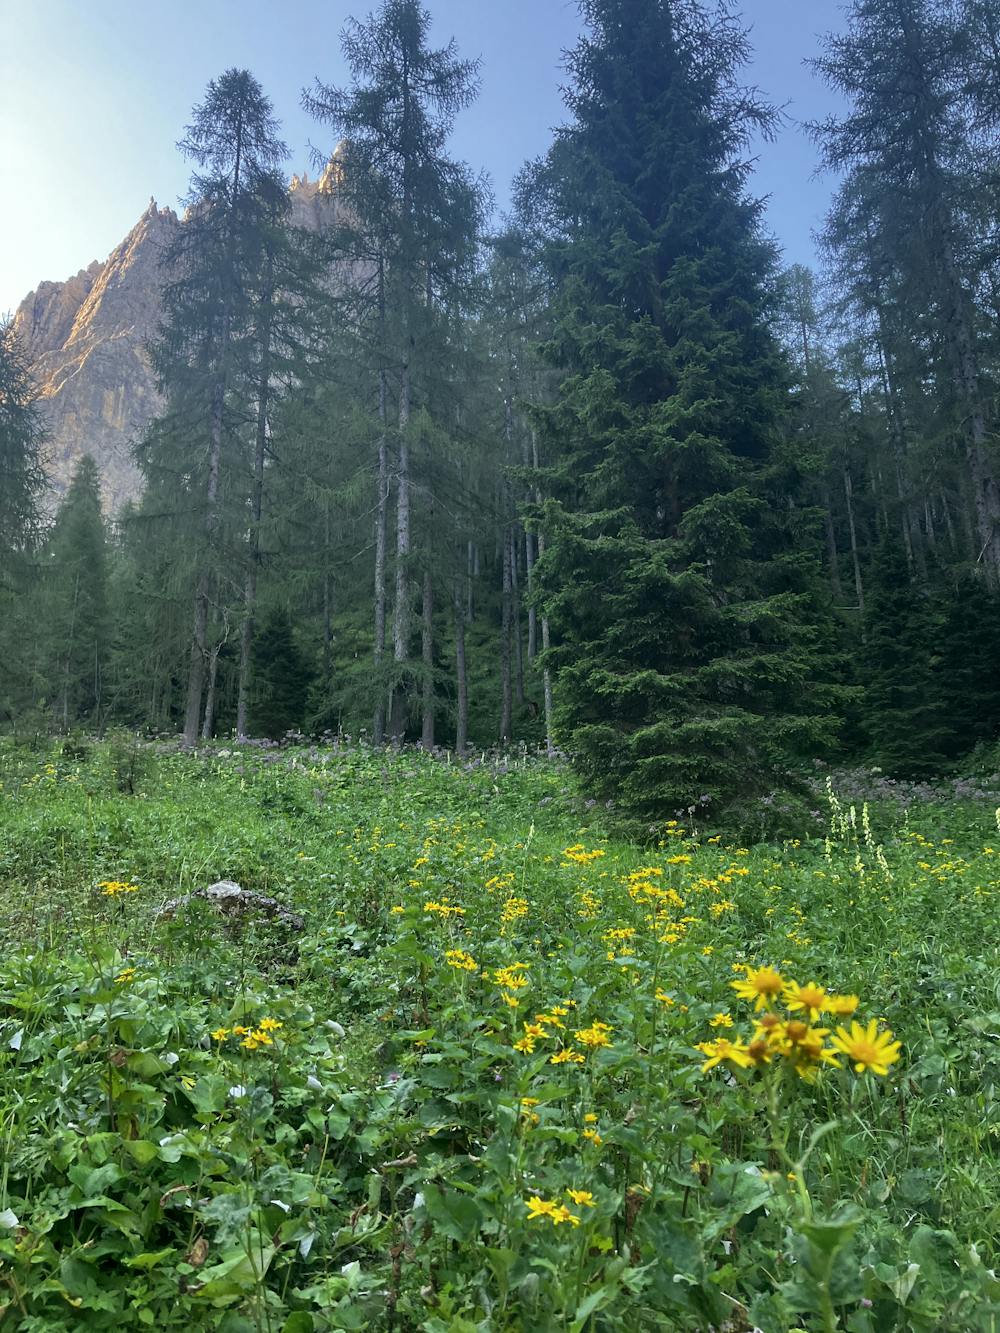 Wildflowers at the start of the ascent to Forcella d'Oltro